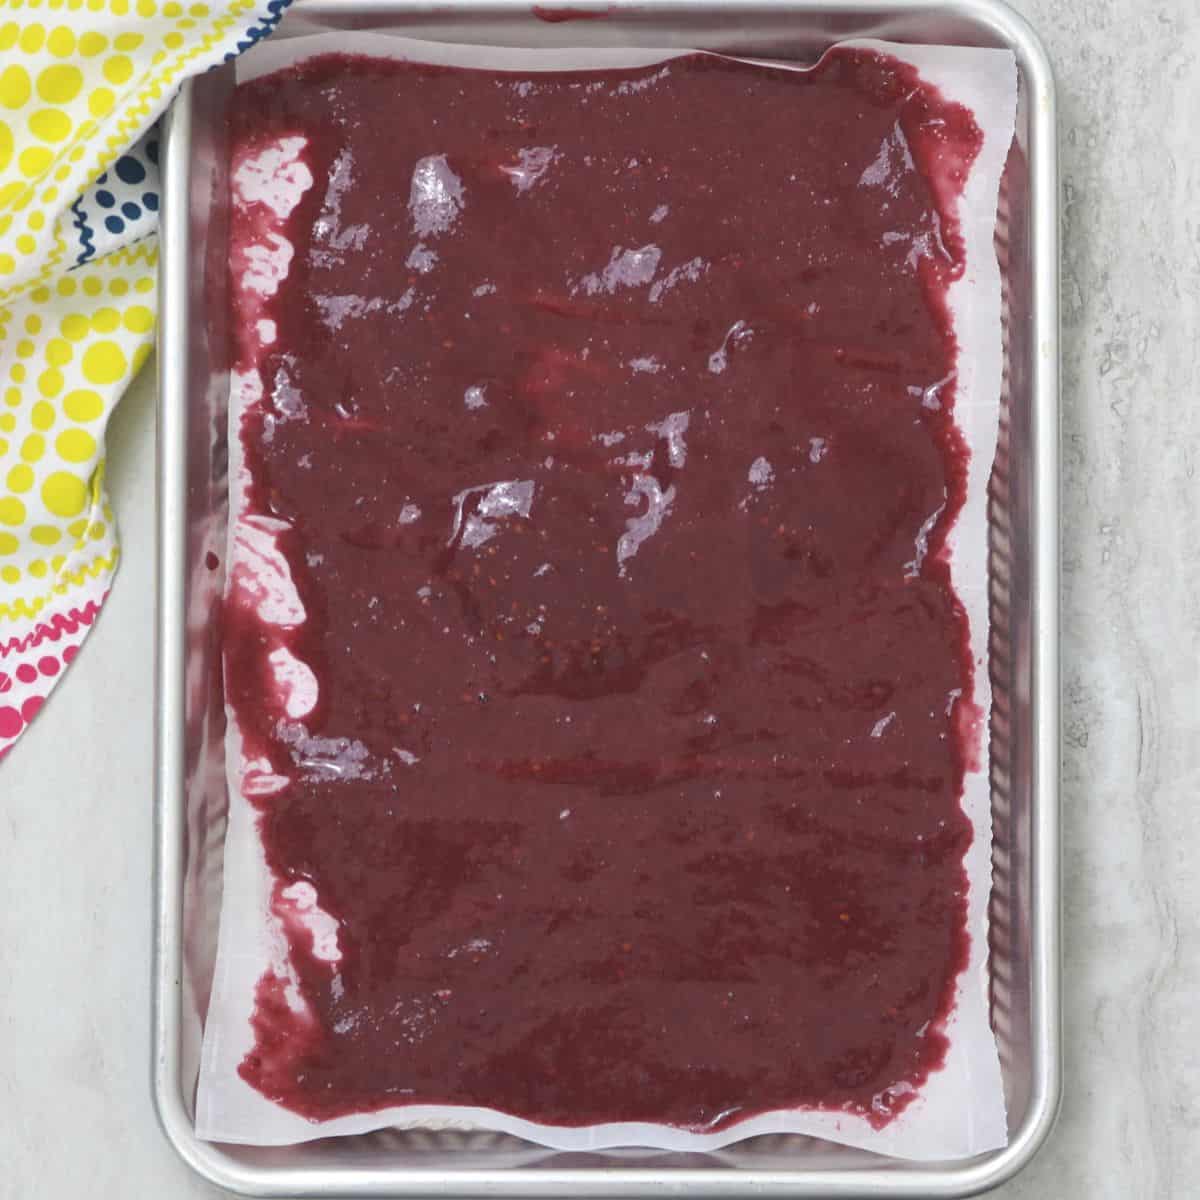 Fruit roll up mixture spread out on sheet pan.